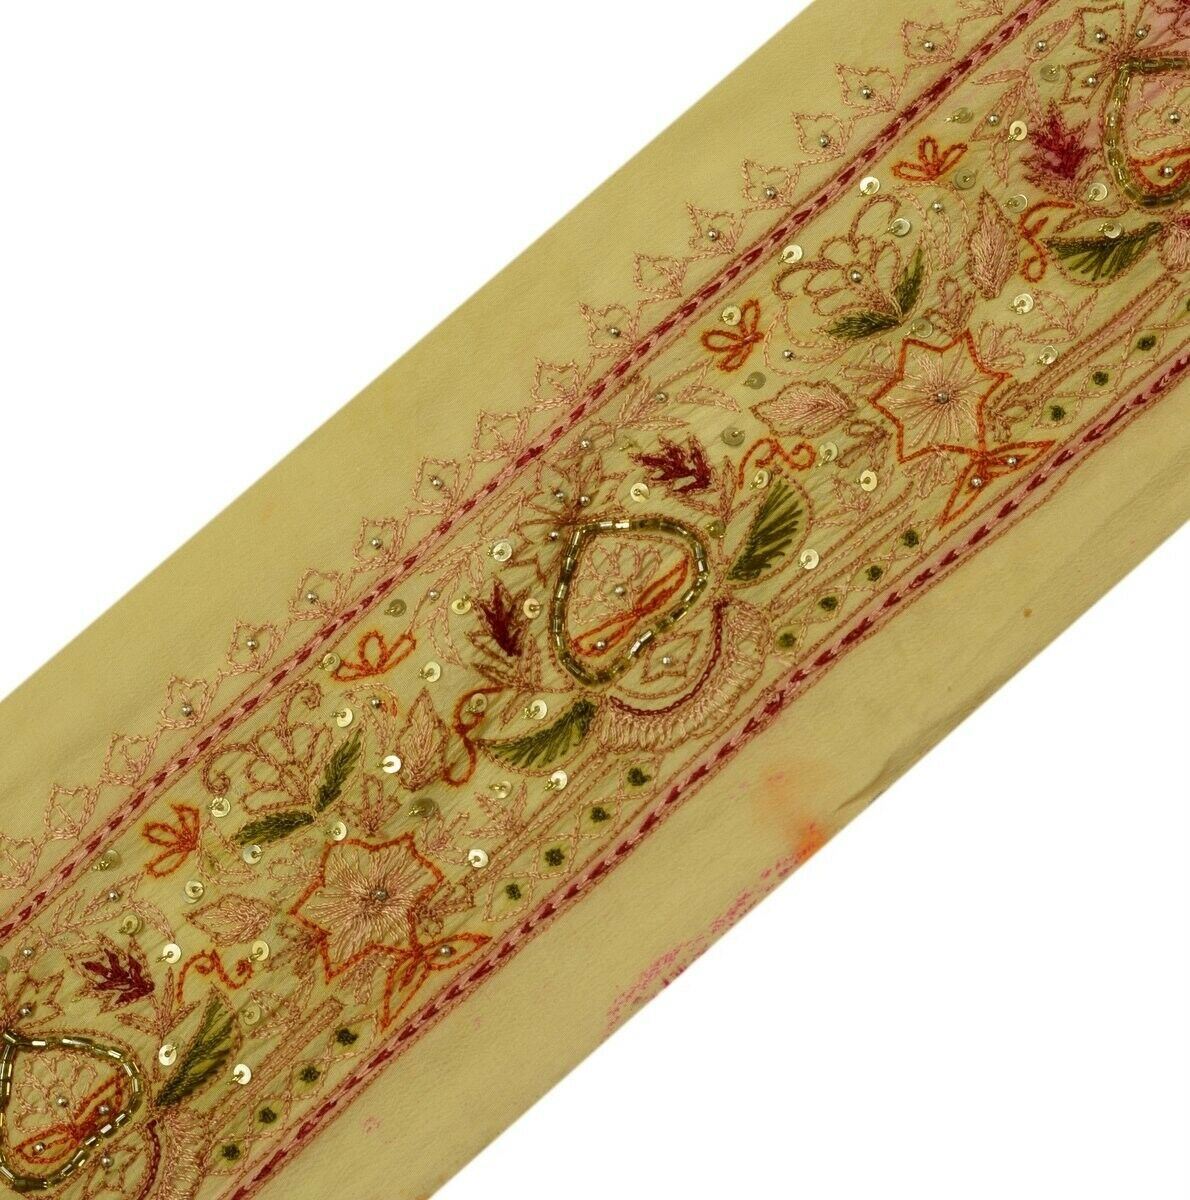 Vintage Saree Border Indian Craft Trim Beaded Embroidered Cream Ribbon Lace